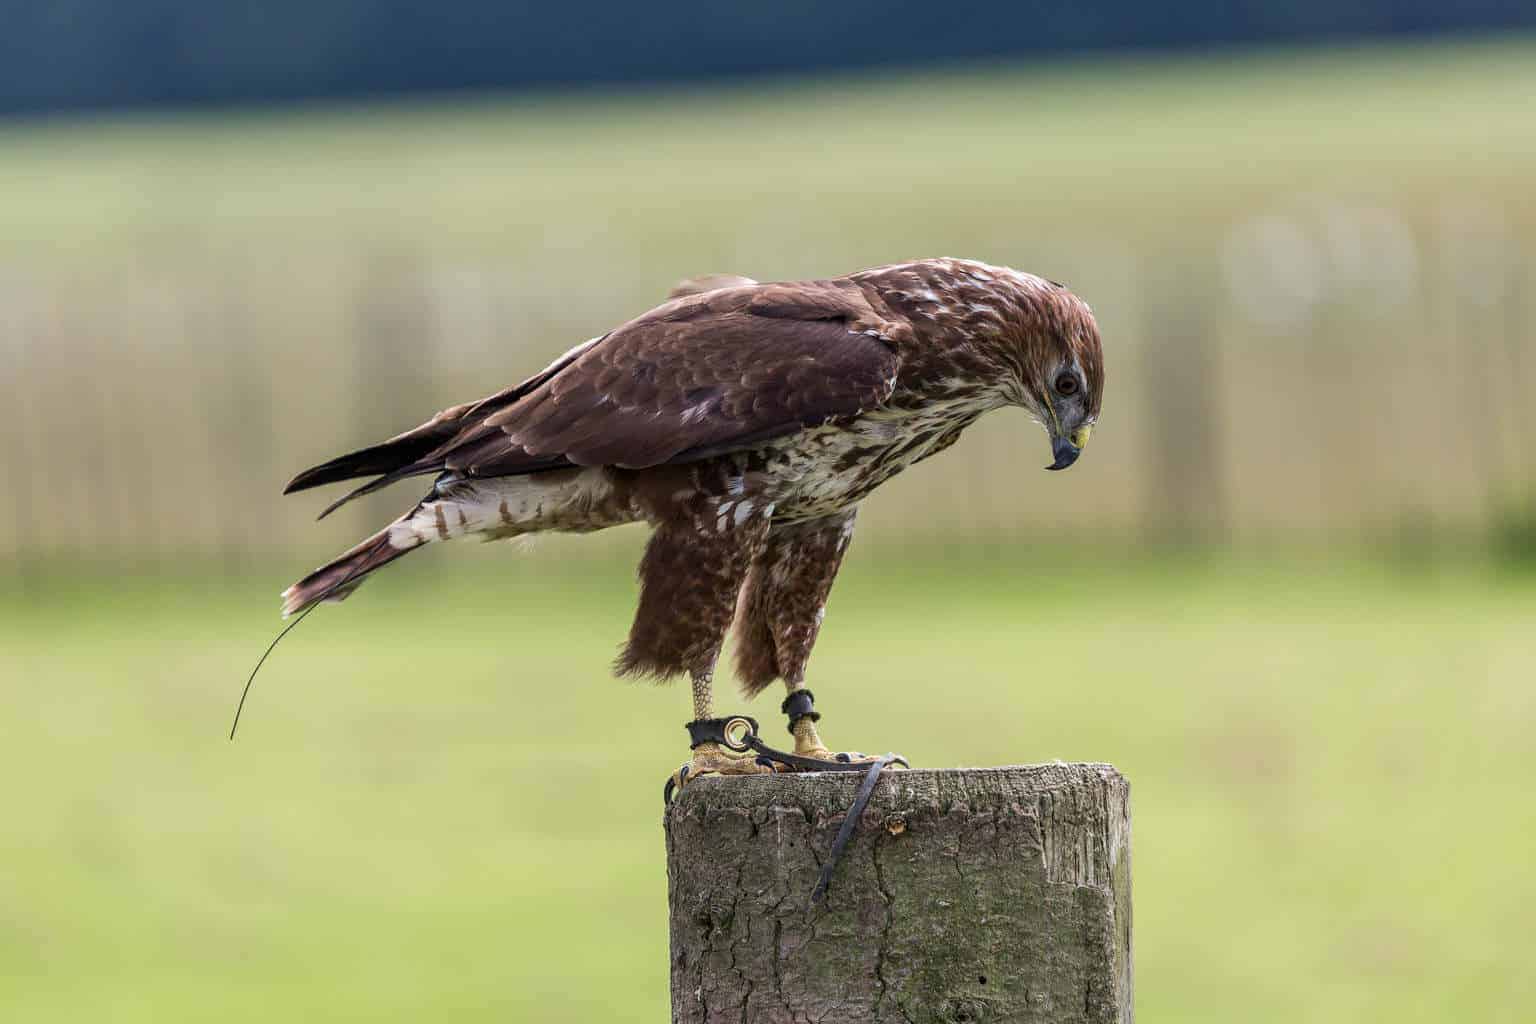 Common Buzzard at the National Centre for Birds of Prey, Duncombe Park, Helmsley UK